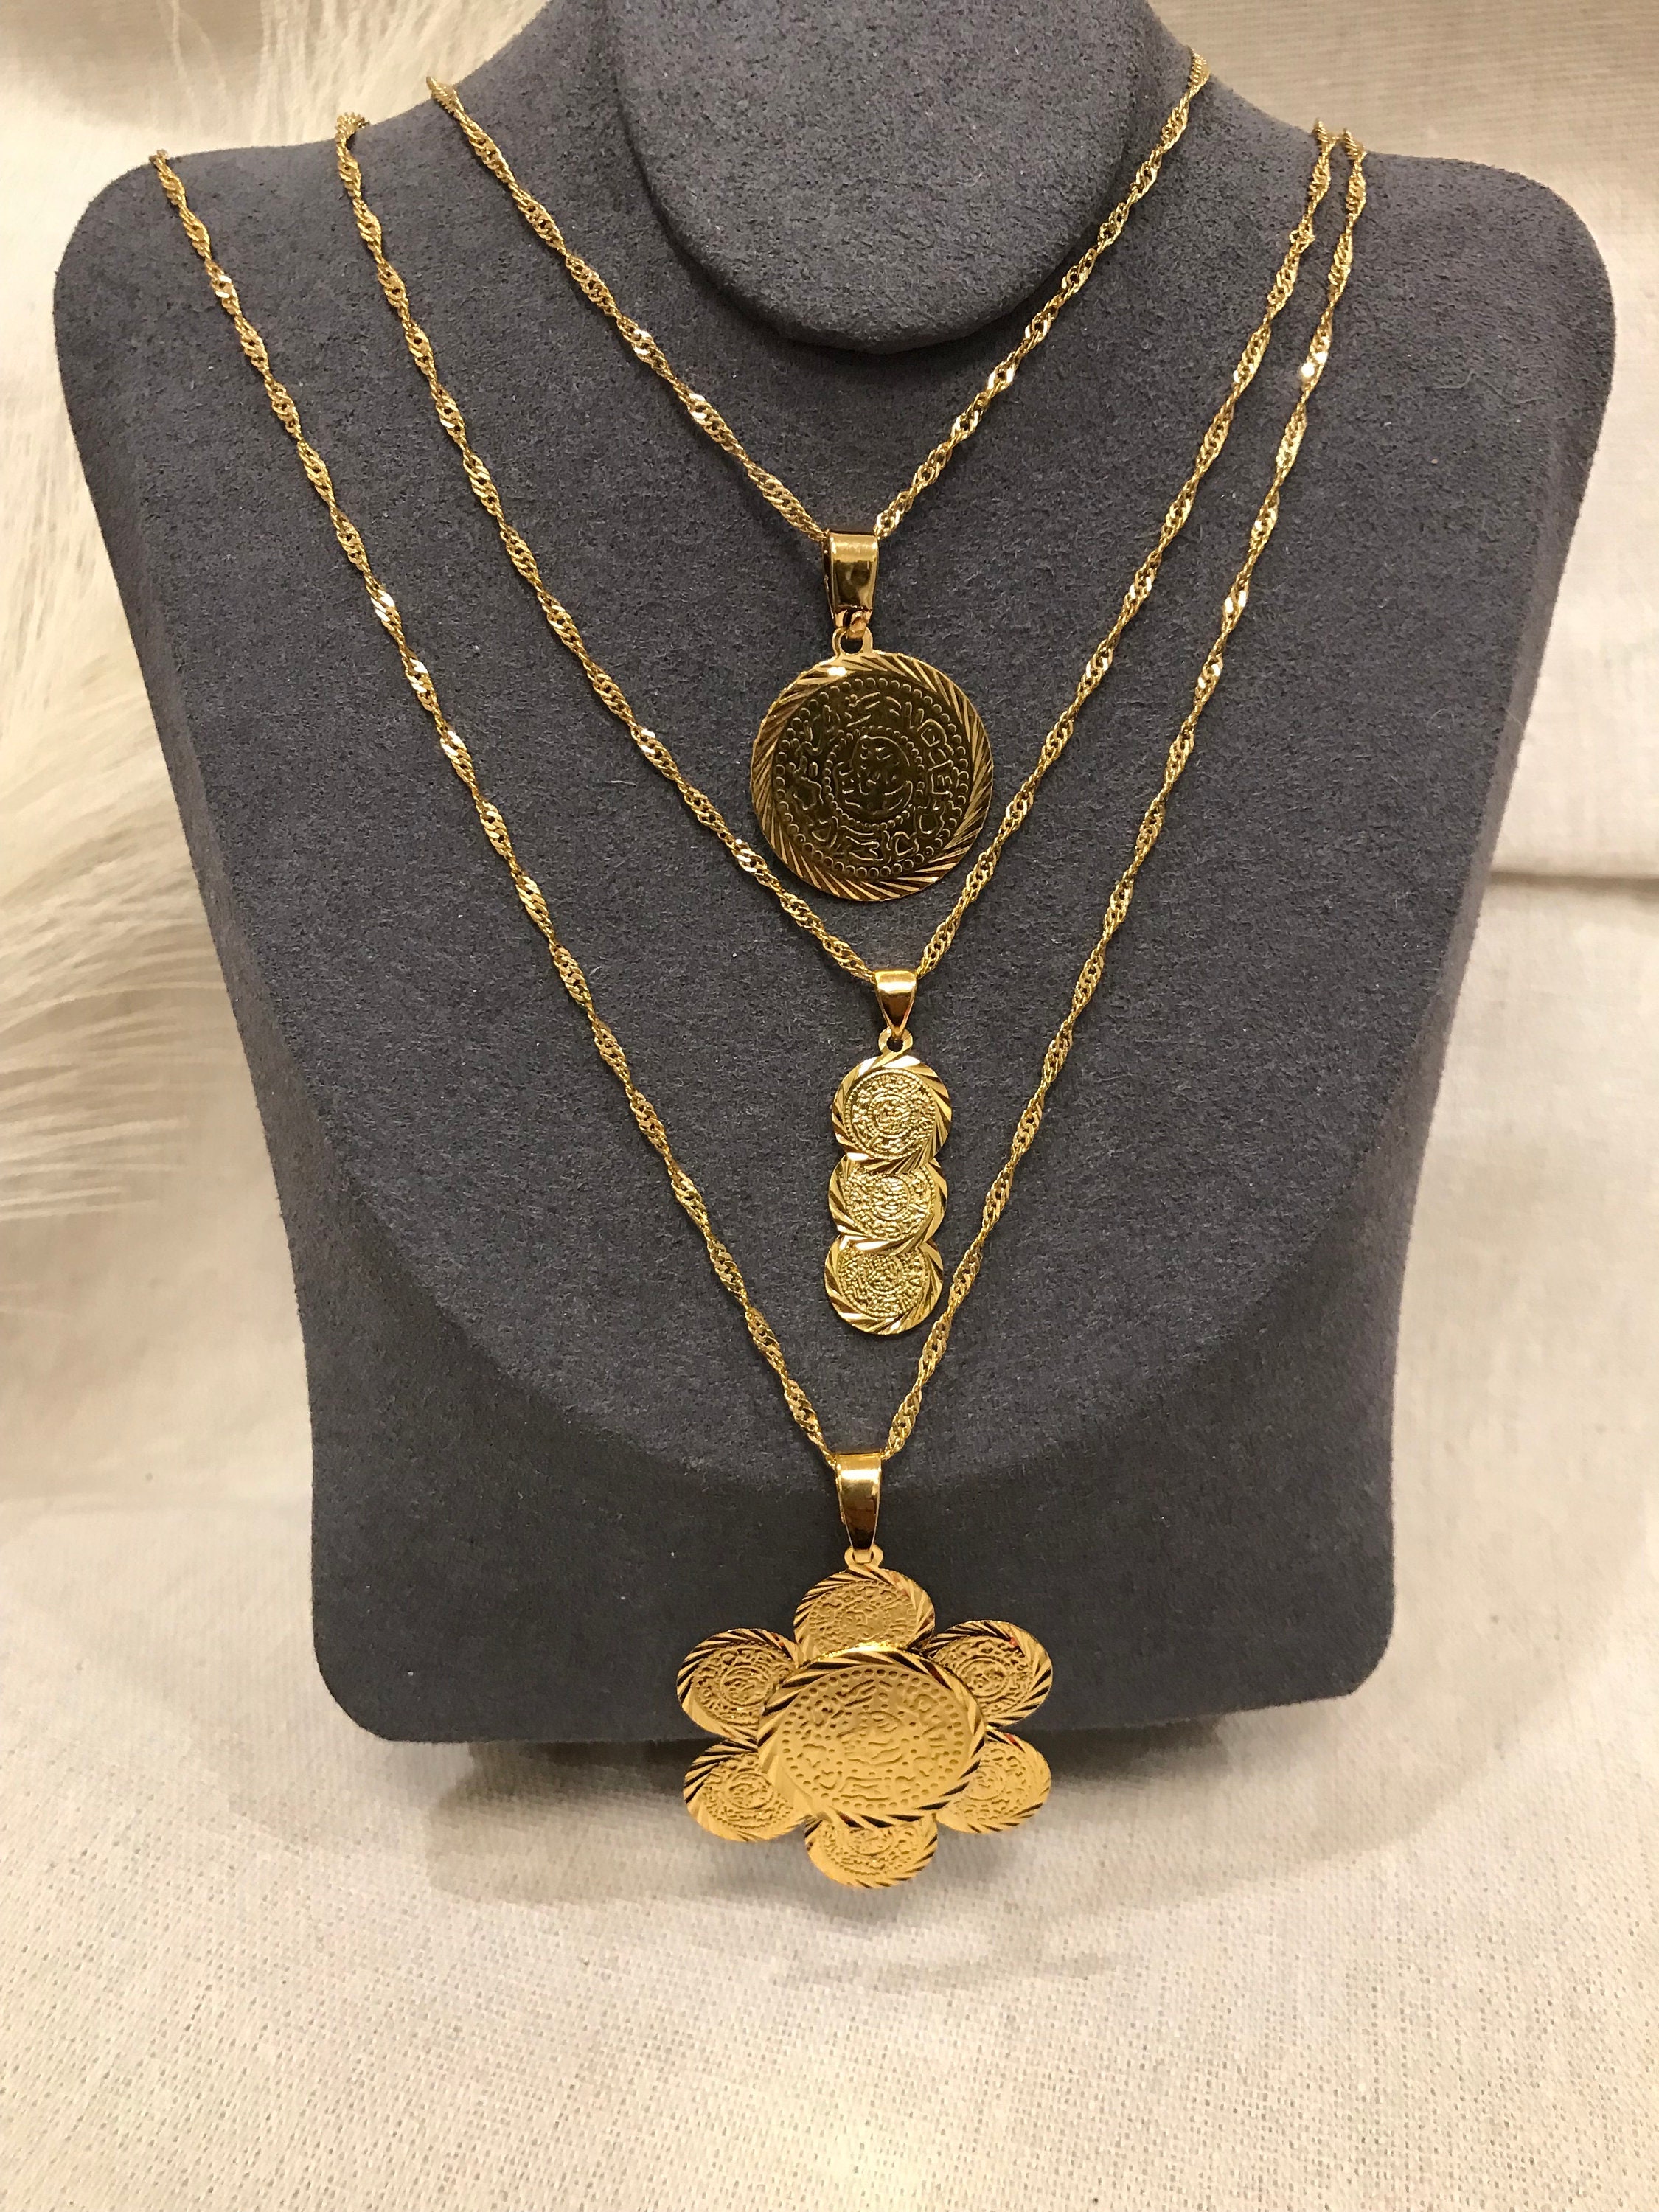 Gold Arab Gold Plated Jewellery Set For Women Necklace, Bracelet, Earrings,  And Ring With Coin Bijoux Classic Middle Eastern Style 201222 From Xue08,  $13.04 | DHgate.Com